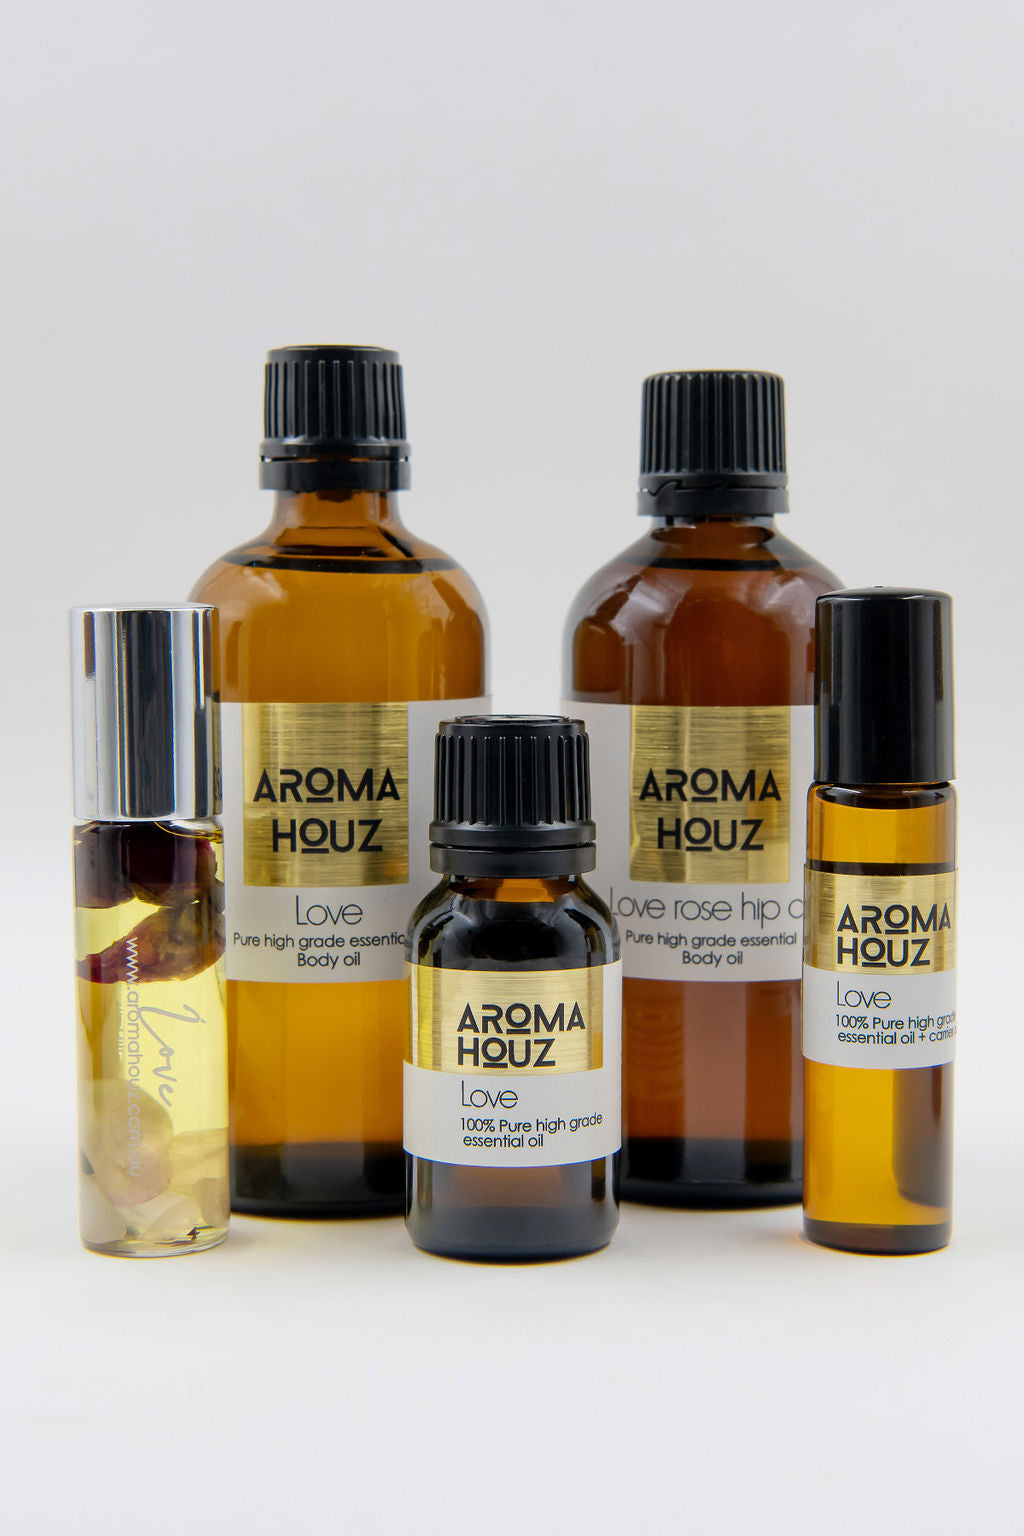 Aroma Houz oils are of the highest and purest quality and maybe enjoyed through inhalation in your diffuser, added into a warm mineral salt bath or foot soak, or you may like to try our rollers applied topically to instantly calm , heal uplift.